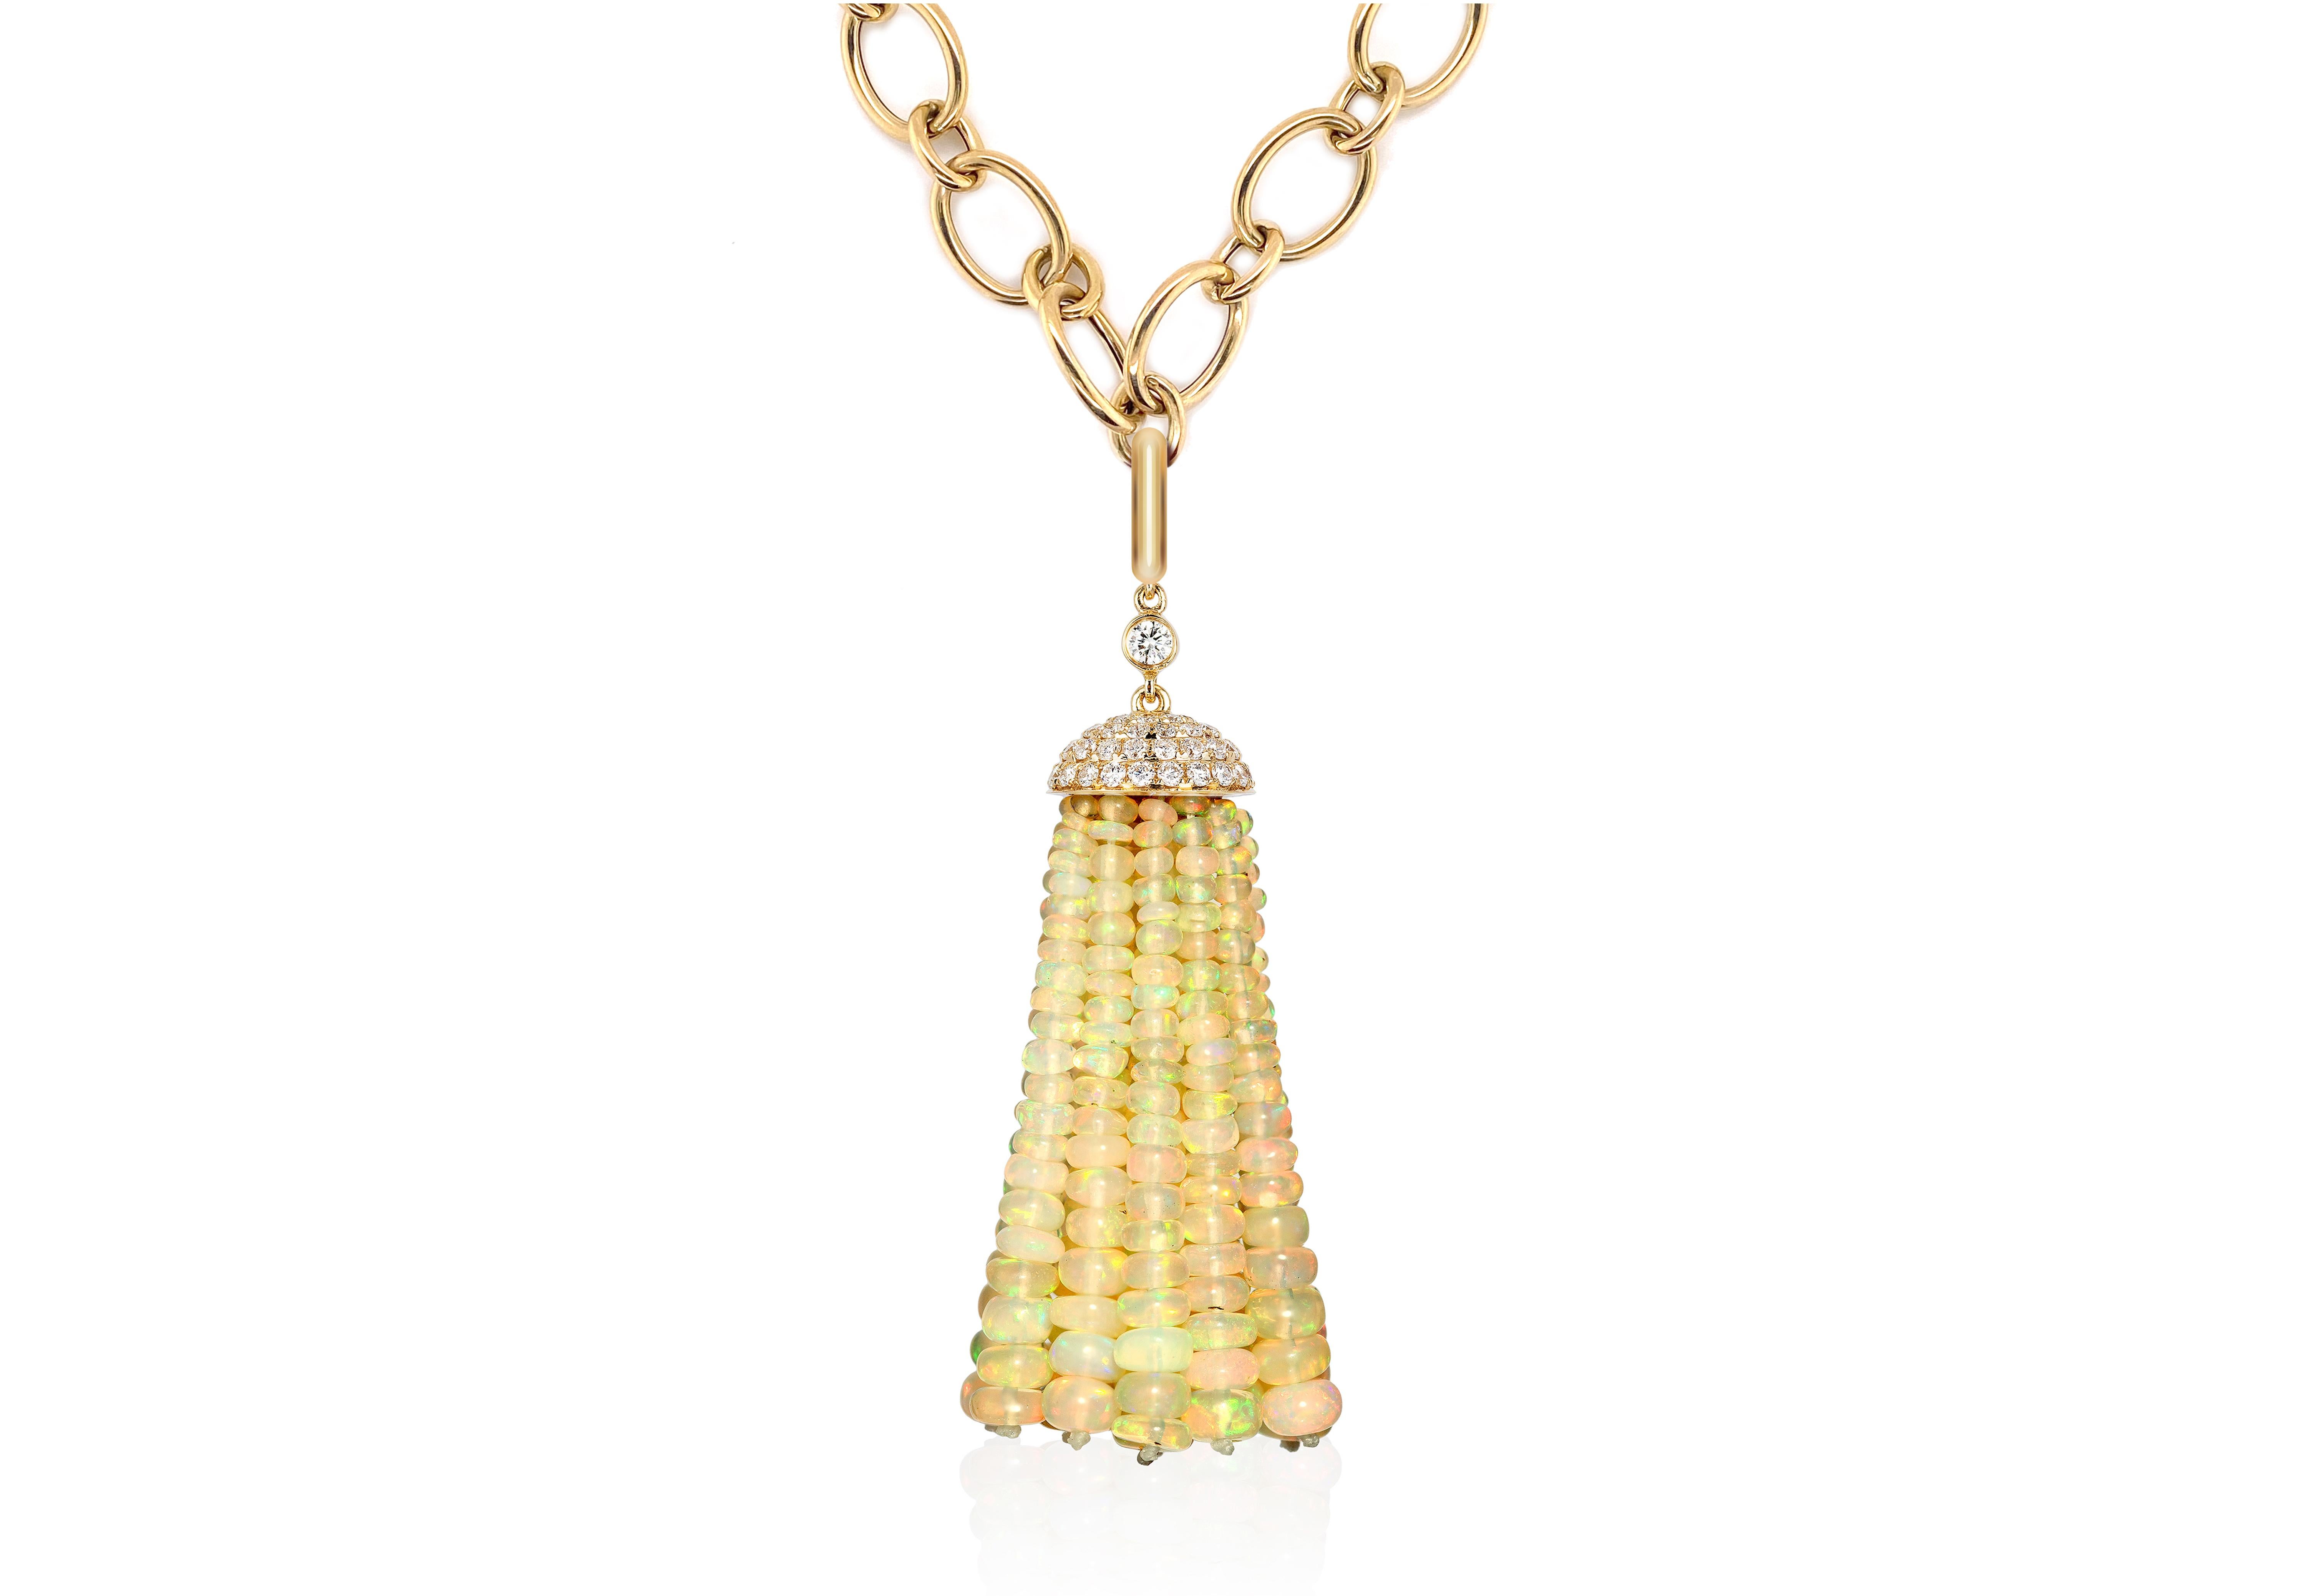 14 Strand Brown Opal Bead Tassel Pendant with Diamond in 18K Yellow Gold, from 'G-One' Collection. Our G-One Collection undeniably carries the most special pieces of Goshwara. The sought-after, one-of-a-kind pieces speak to each unique personality